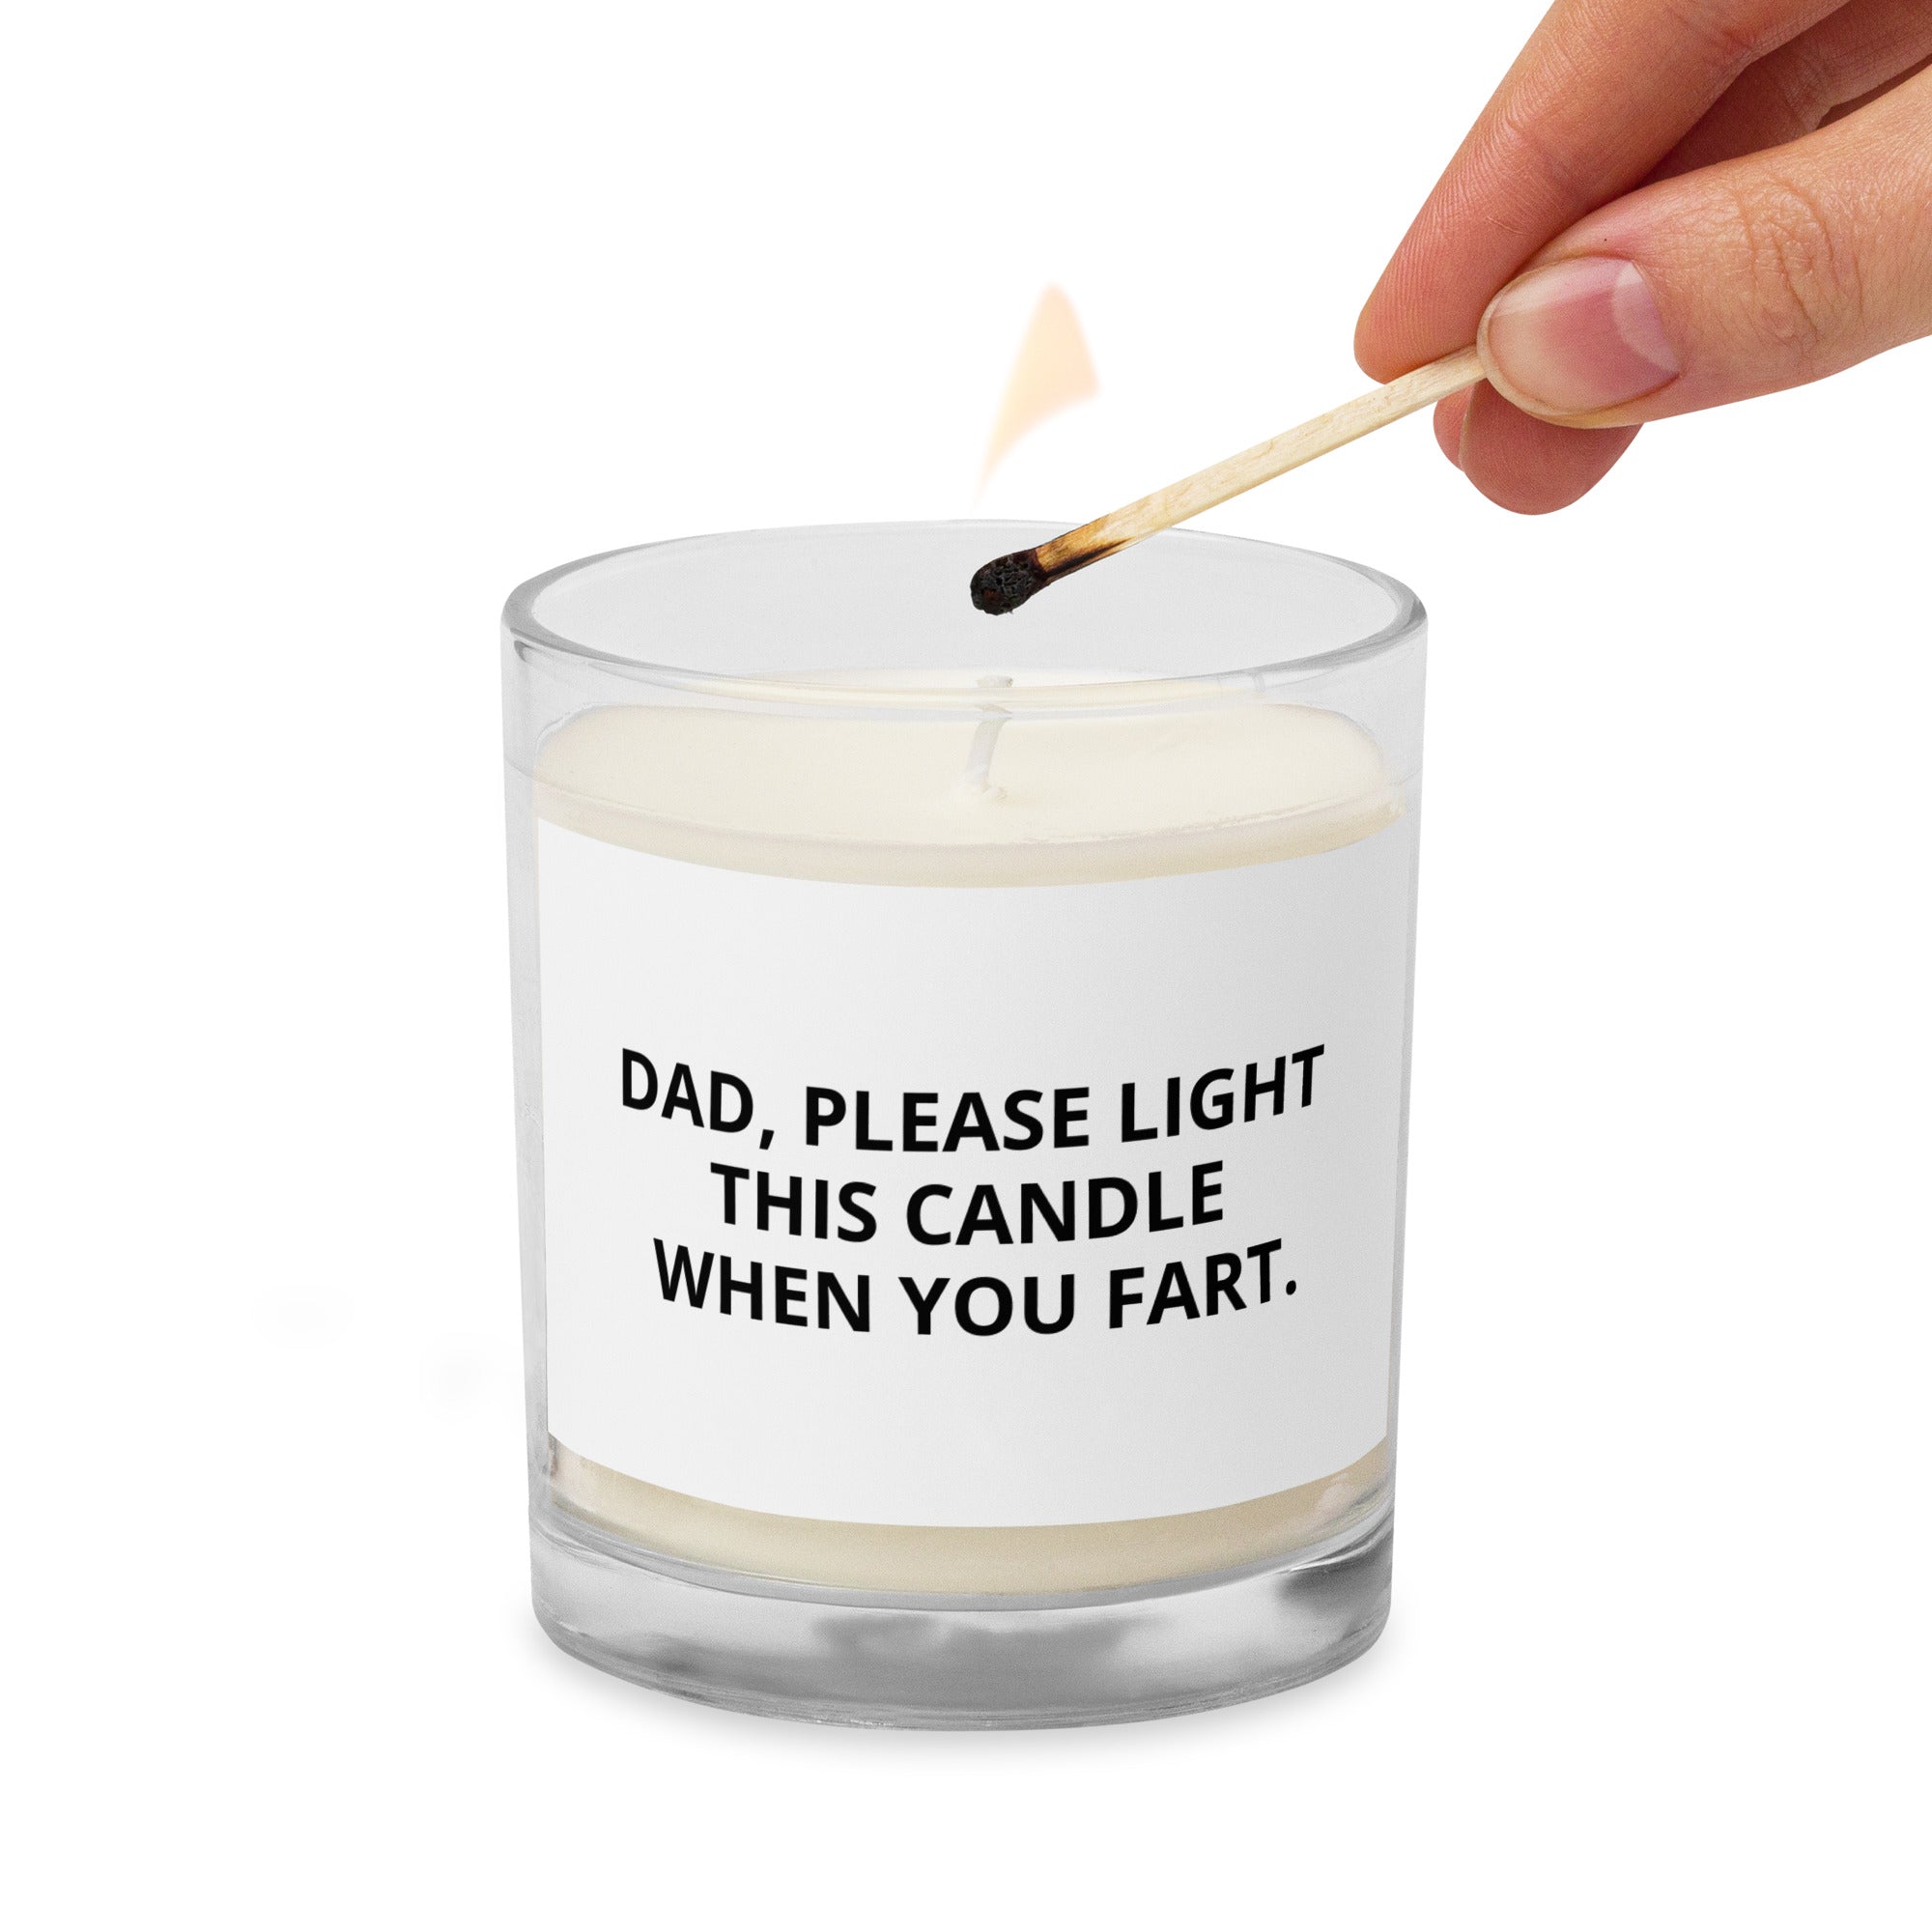 Dad, Please light this candle when you fart.